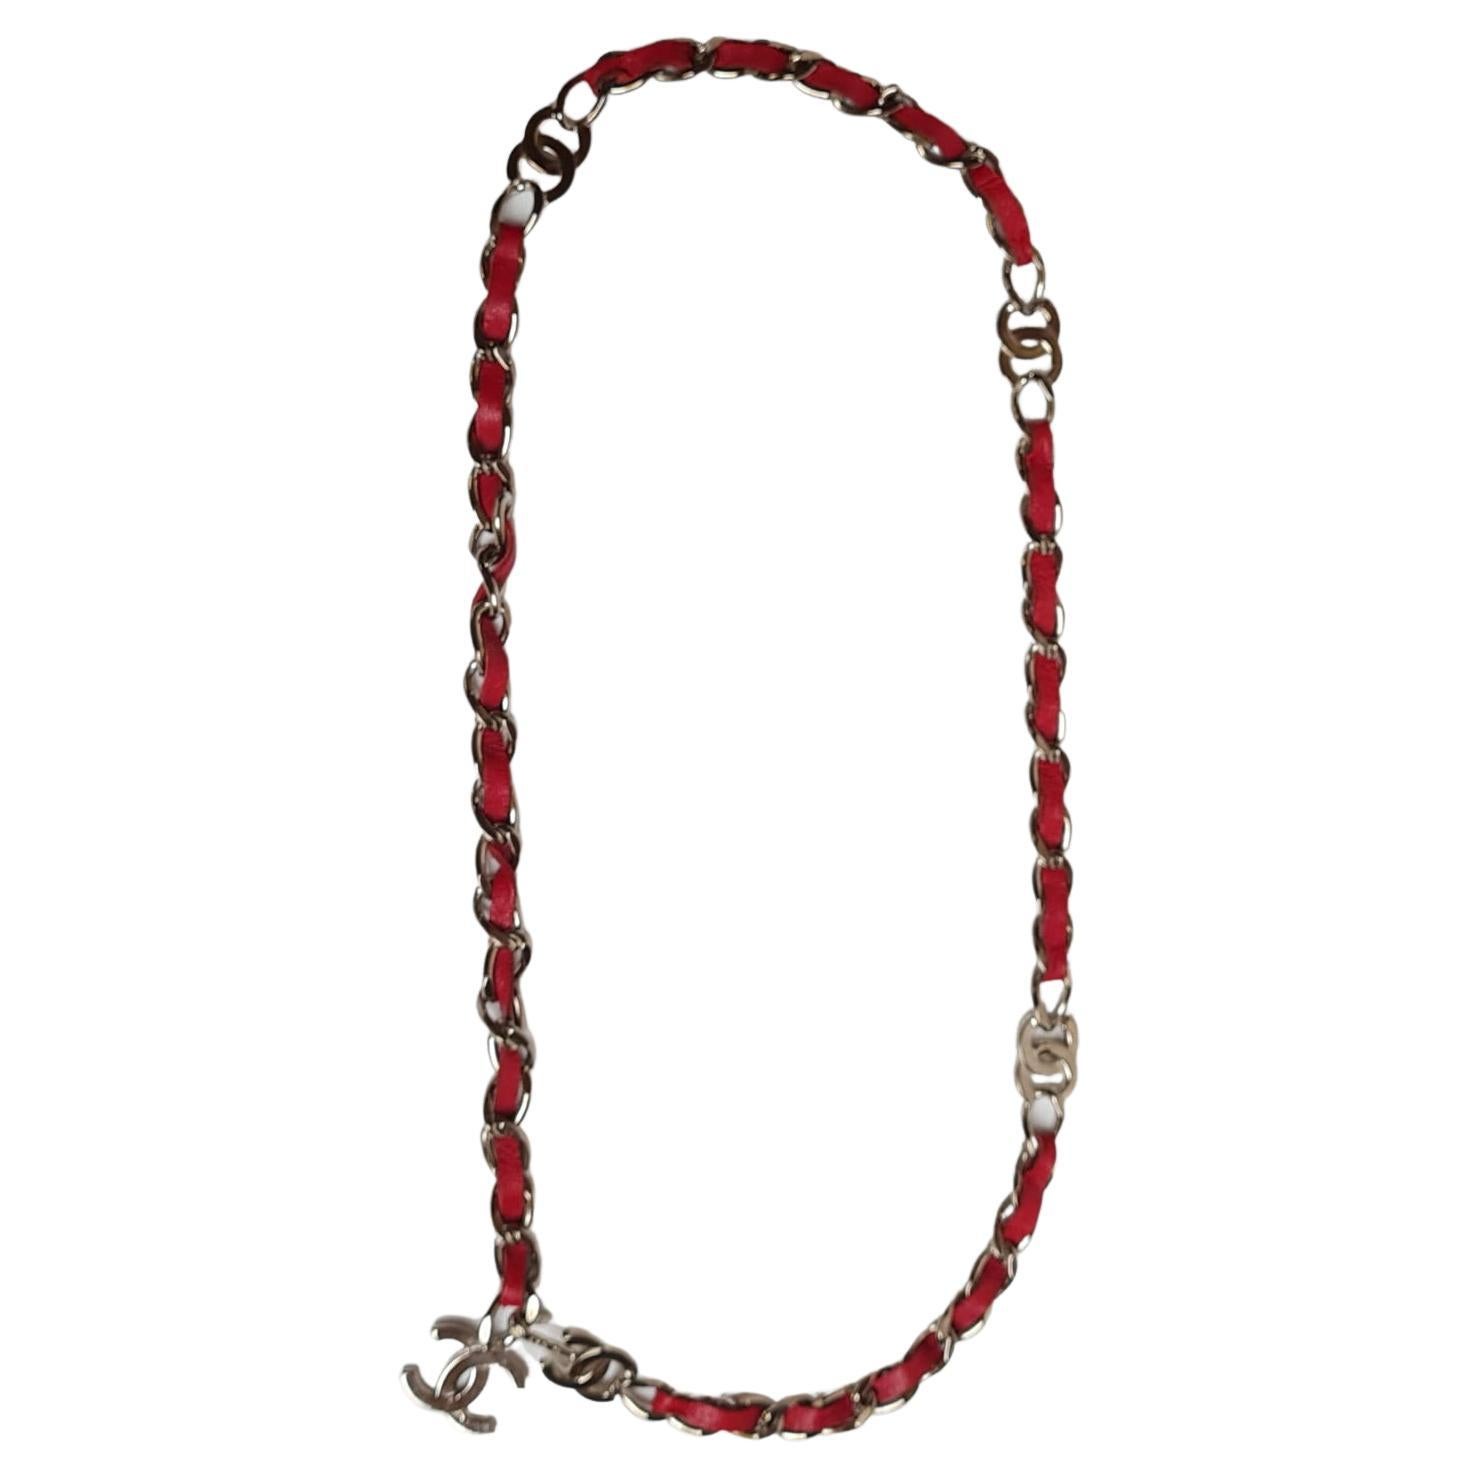 Vintage Red Leather Chain Entwined CC Logo Single Chain Belt